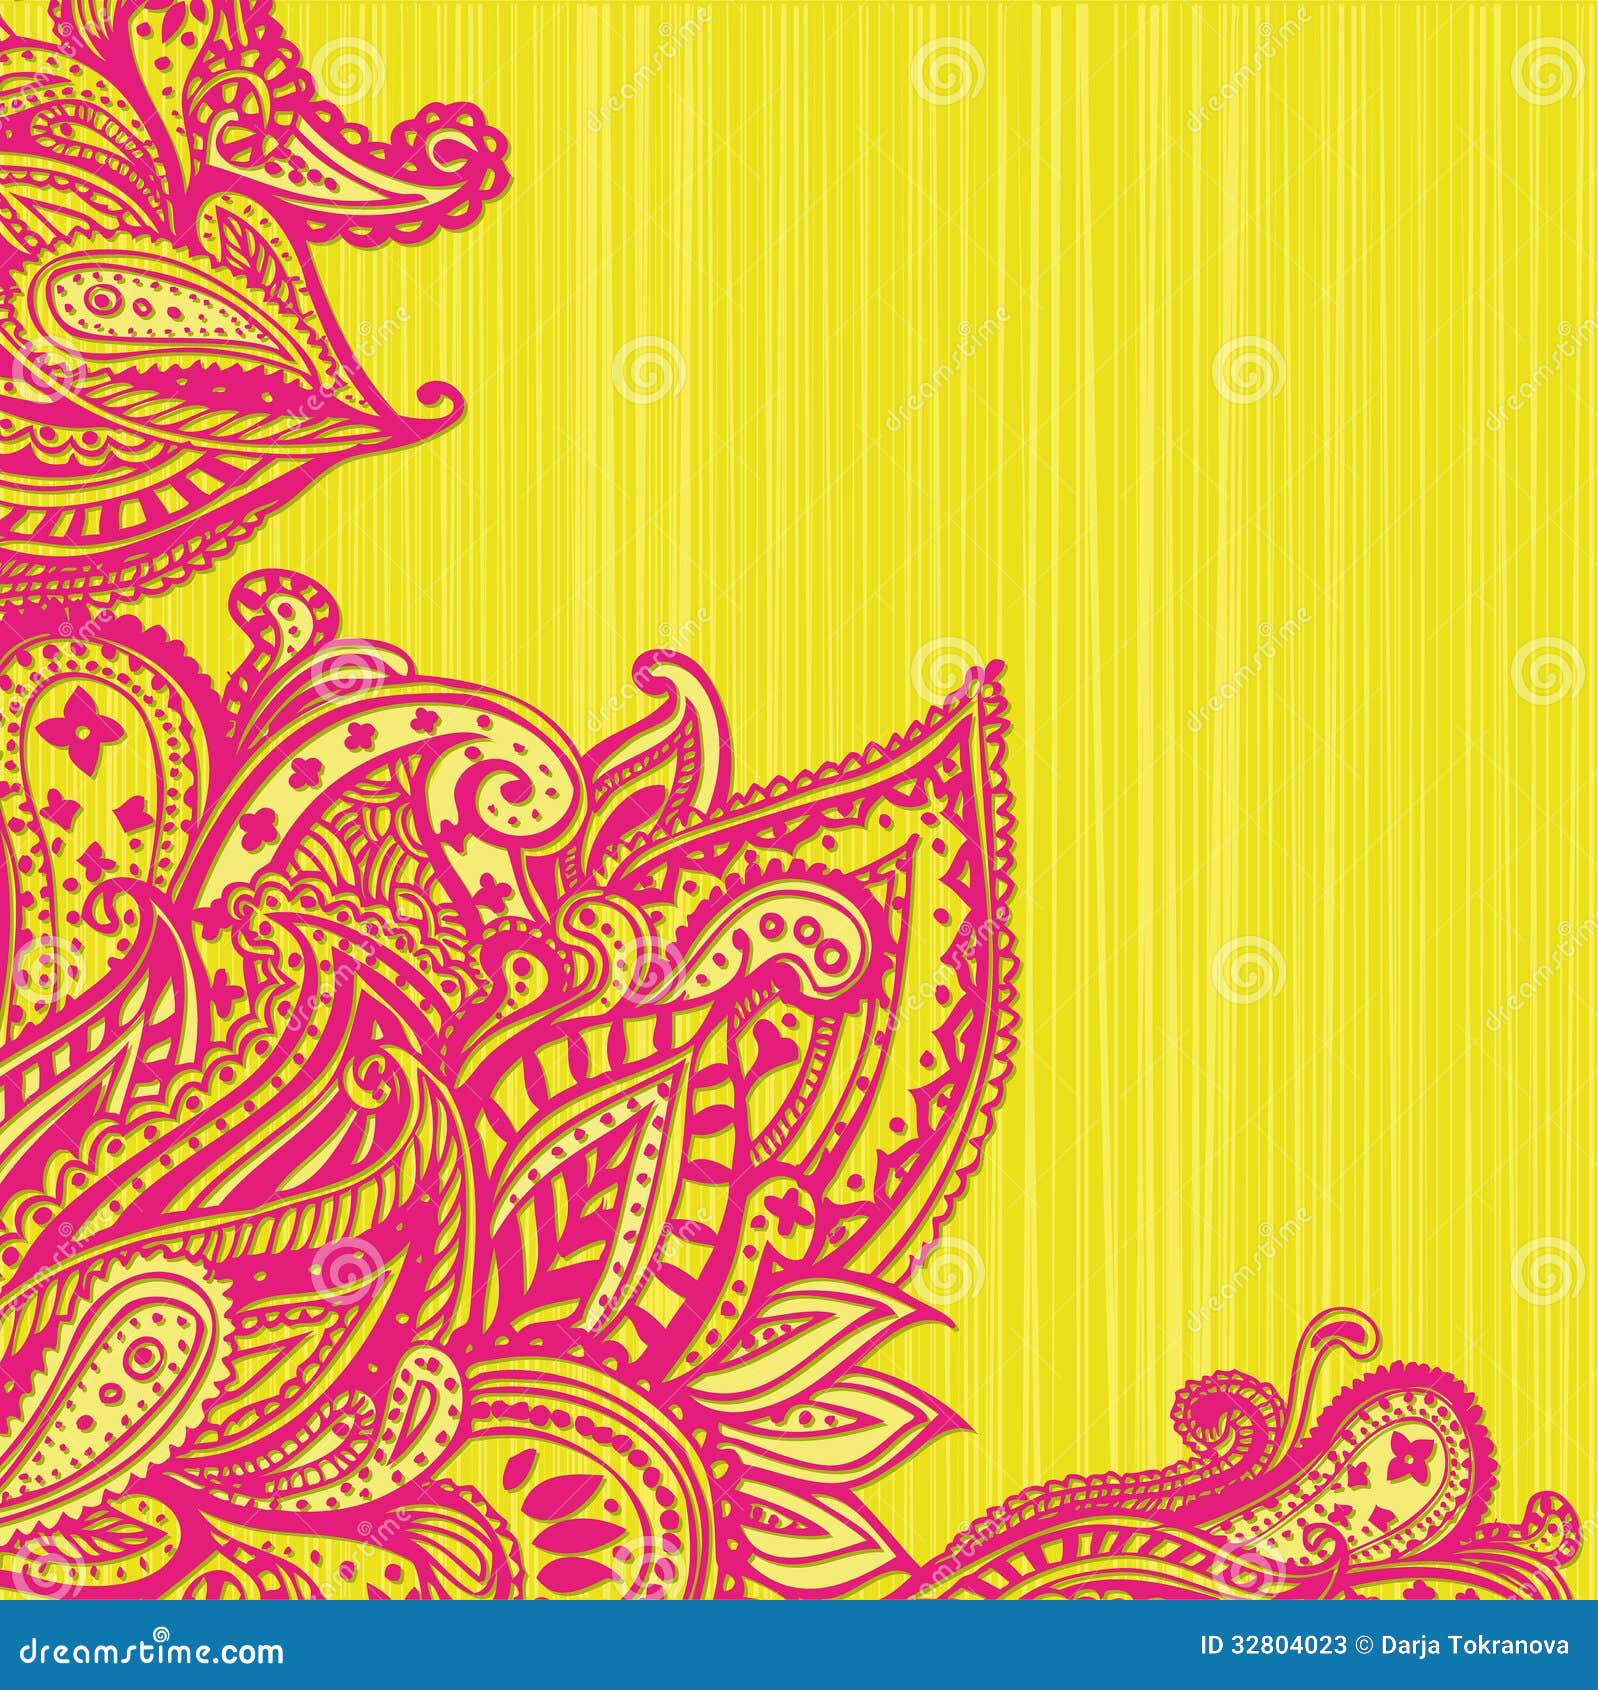 Indian Paisley Background images